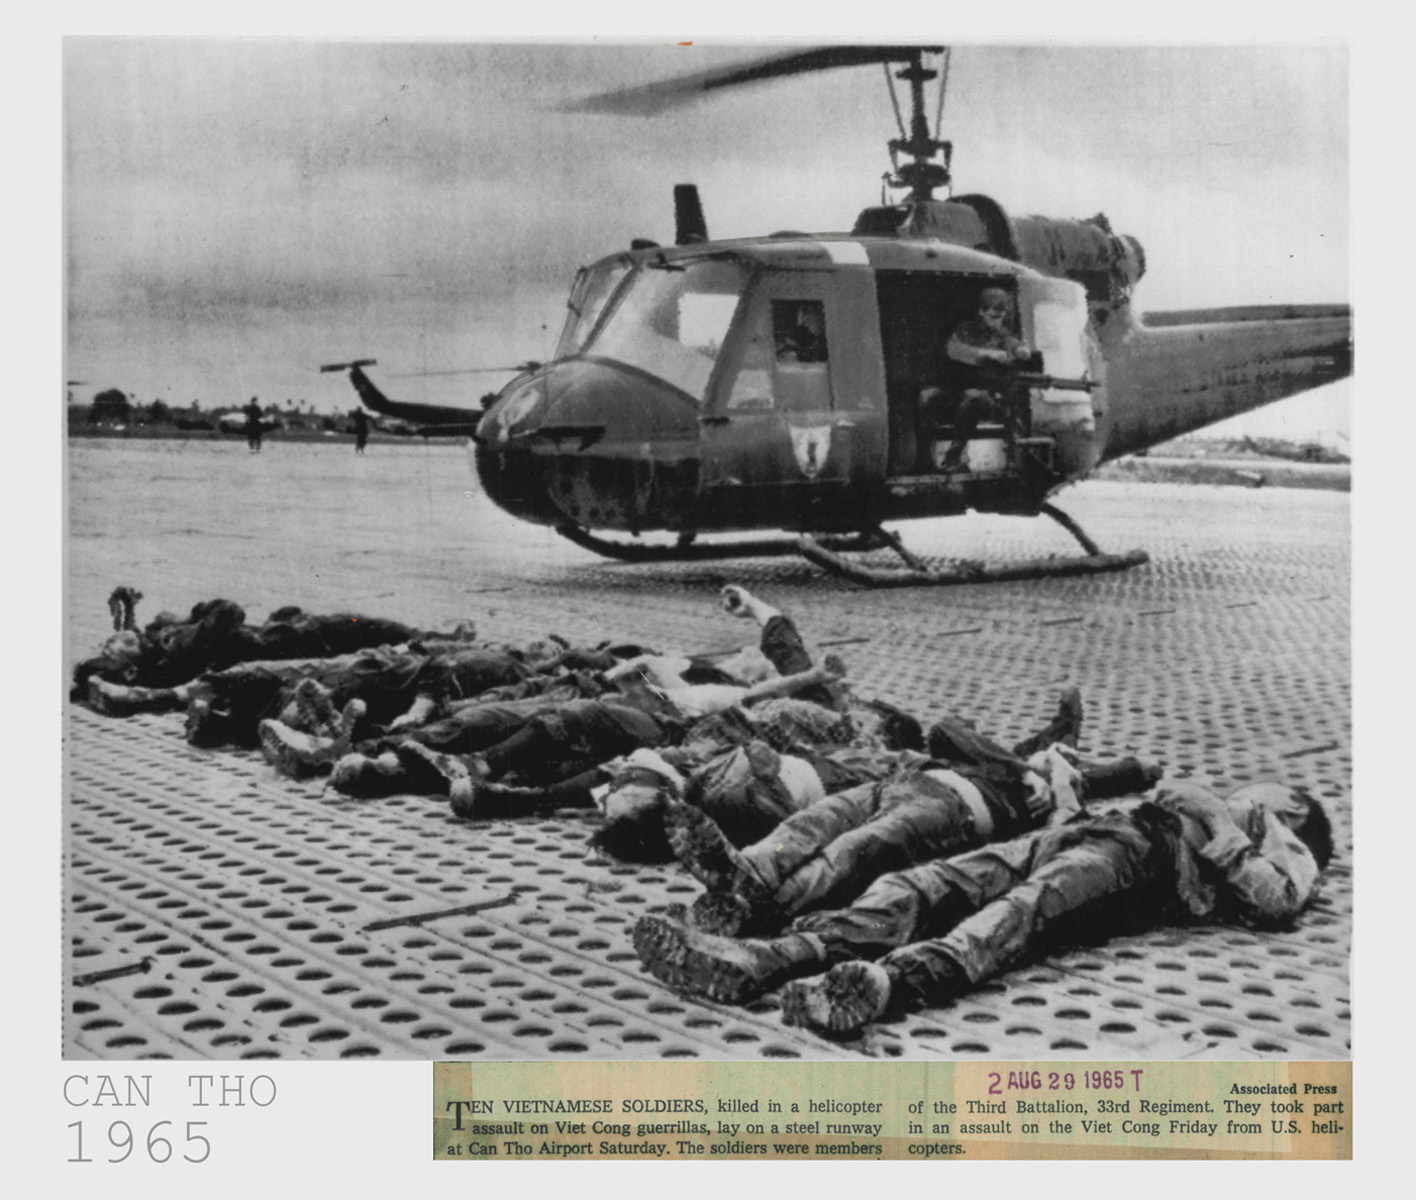 a black and white po of some dead people in front of a helicopter